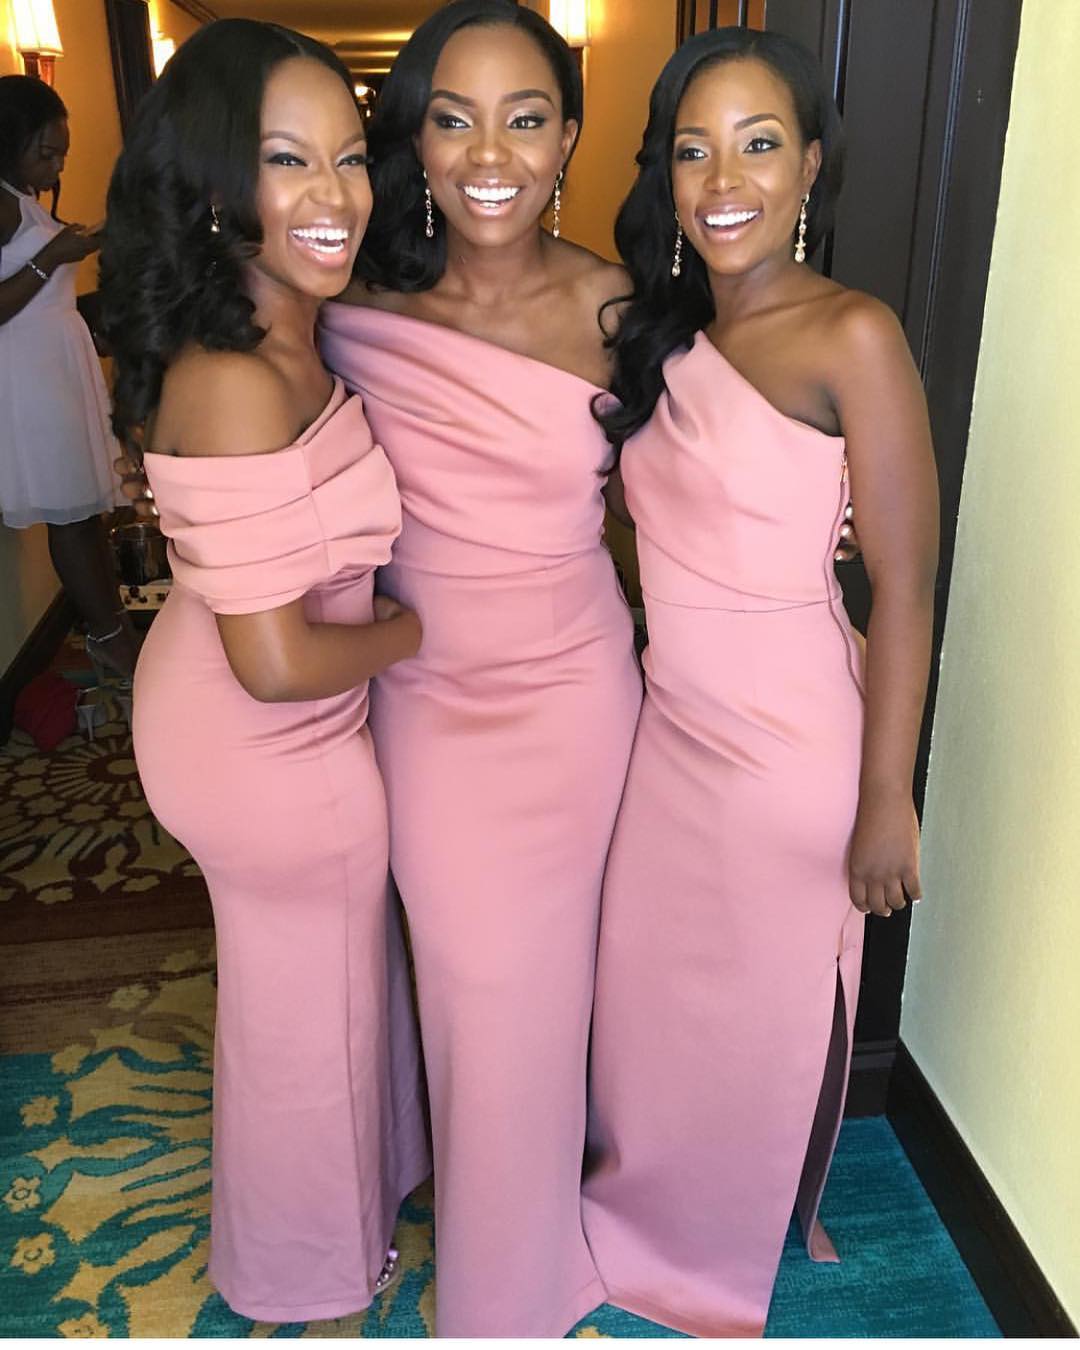 Let Your Girls Look Great In these Lit Bridesmaids Dresses